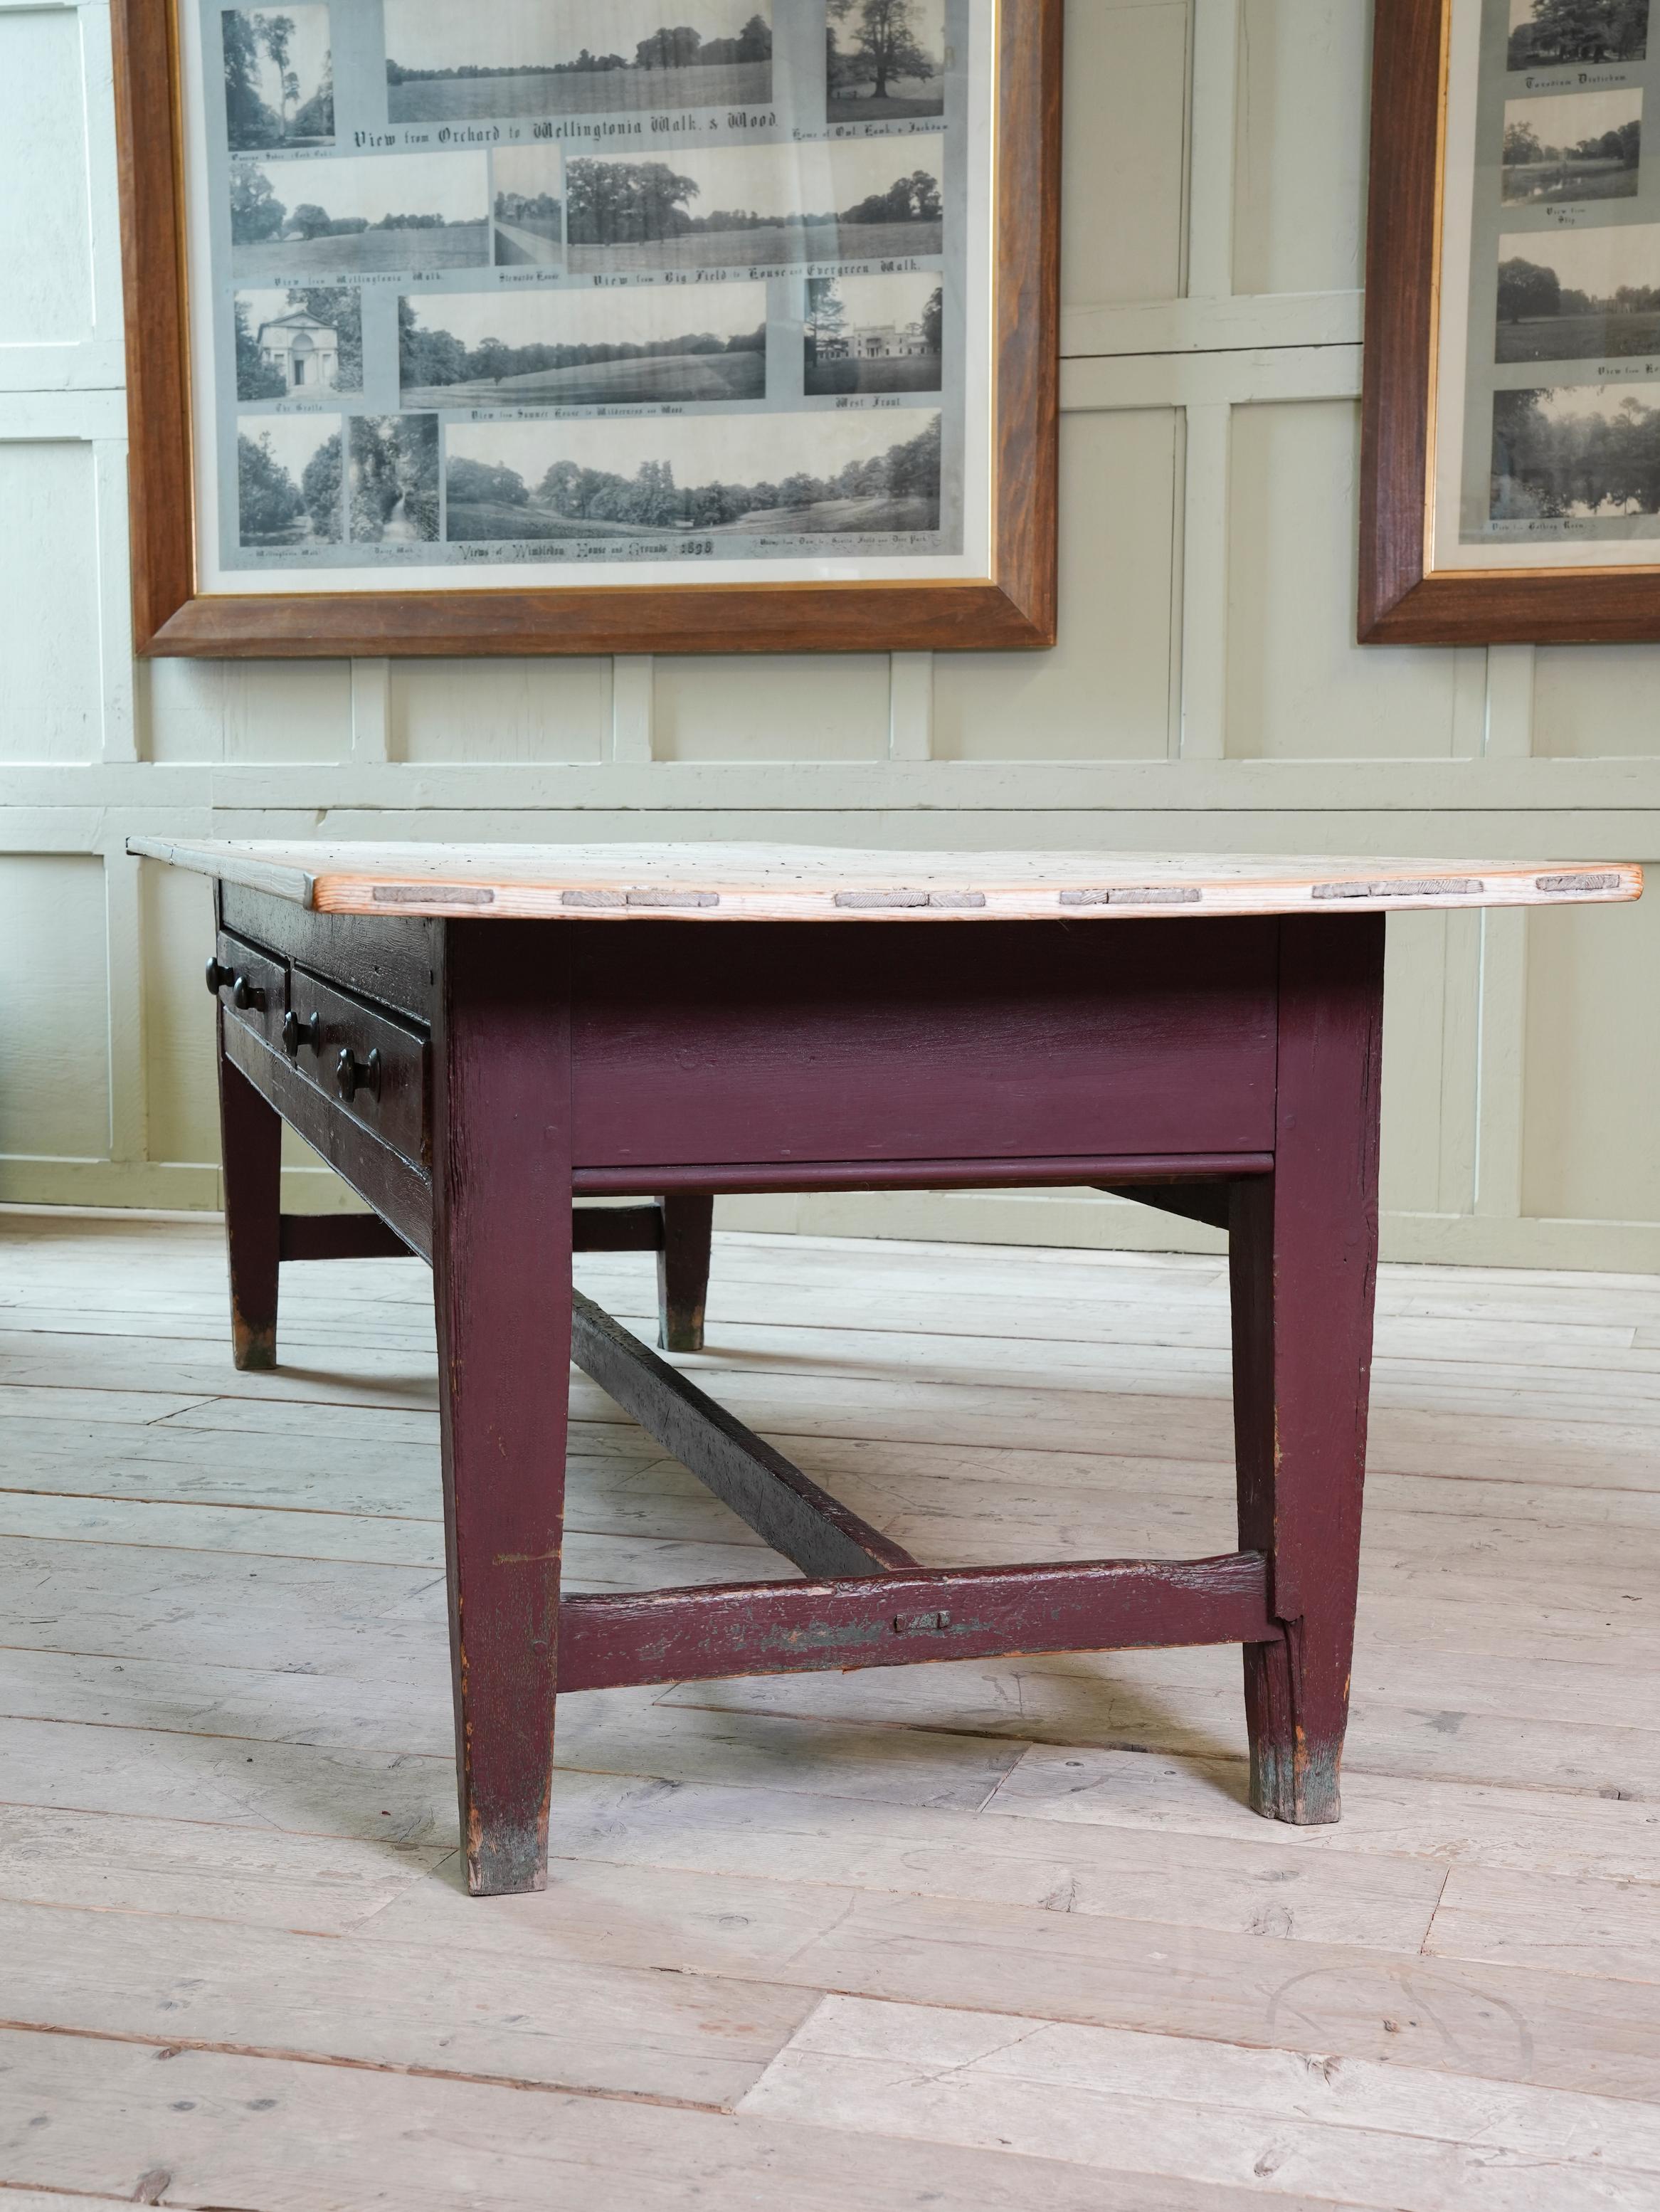 We acquired this magnificent table directly from the two thousand acre, 18th Century Manor House “Plas Gwyn” near Pentraeth on Anglesey, North Wales.

The plum paint to the pine frame and double sided drawers are wholly original and have acquired